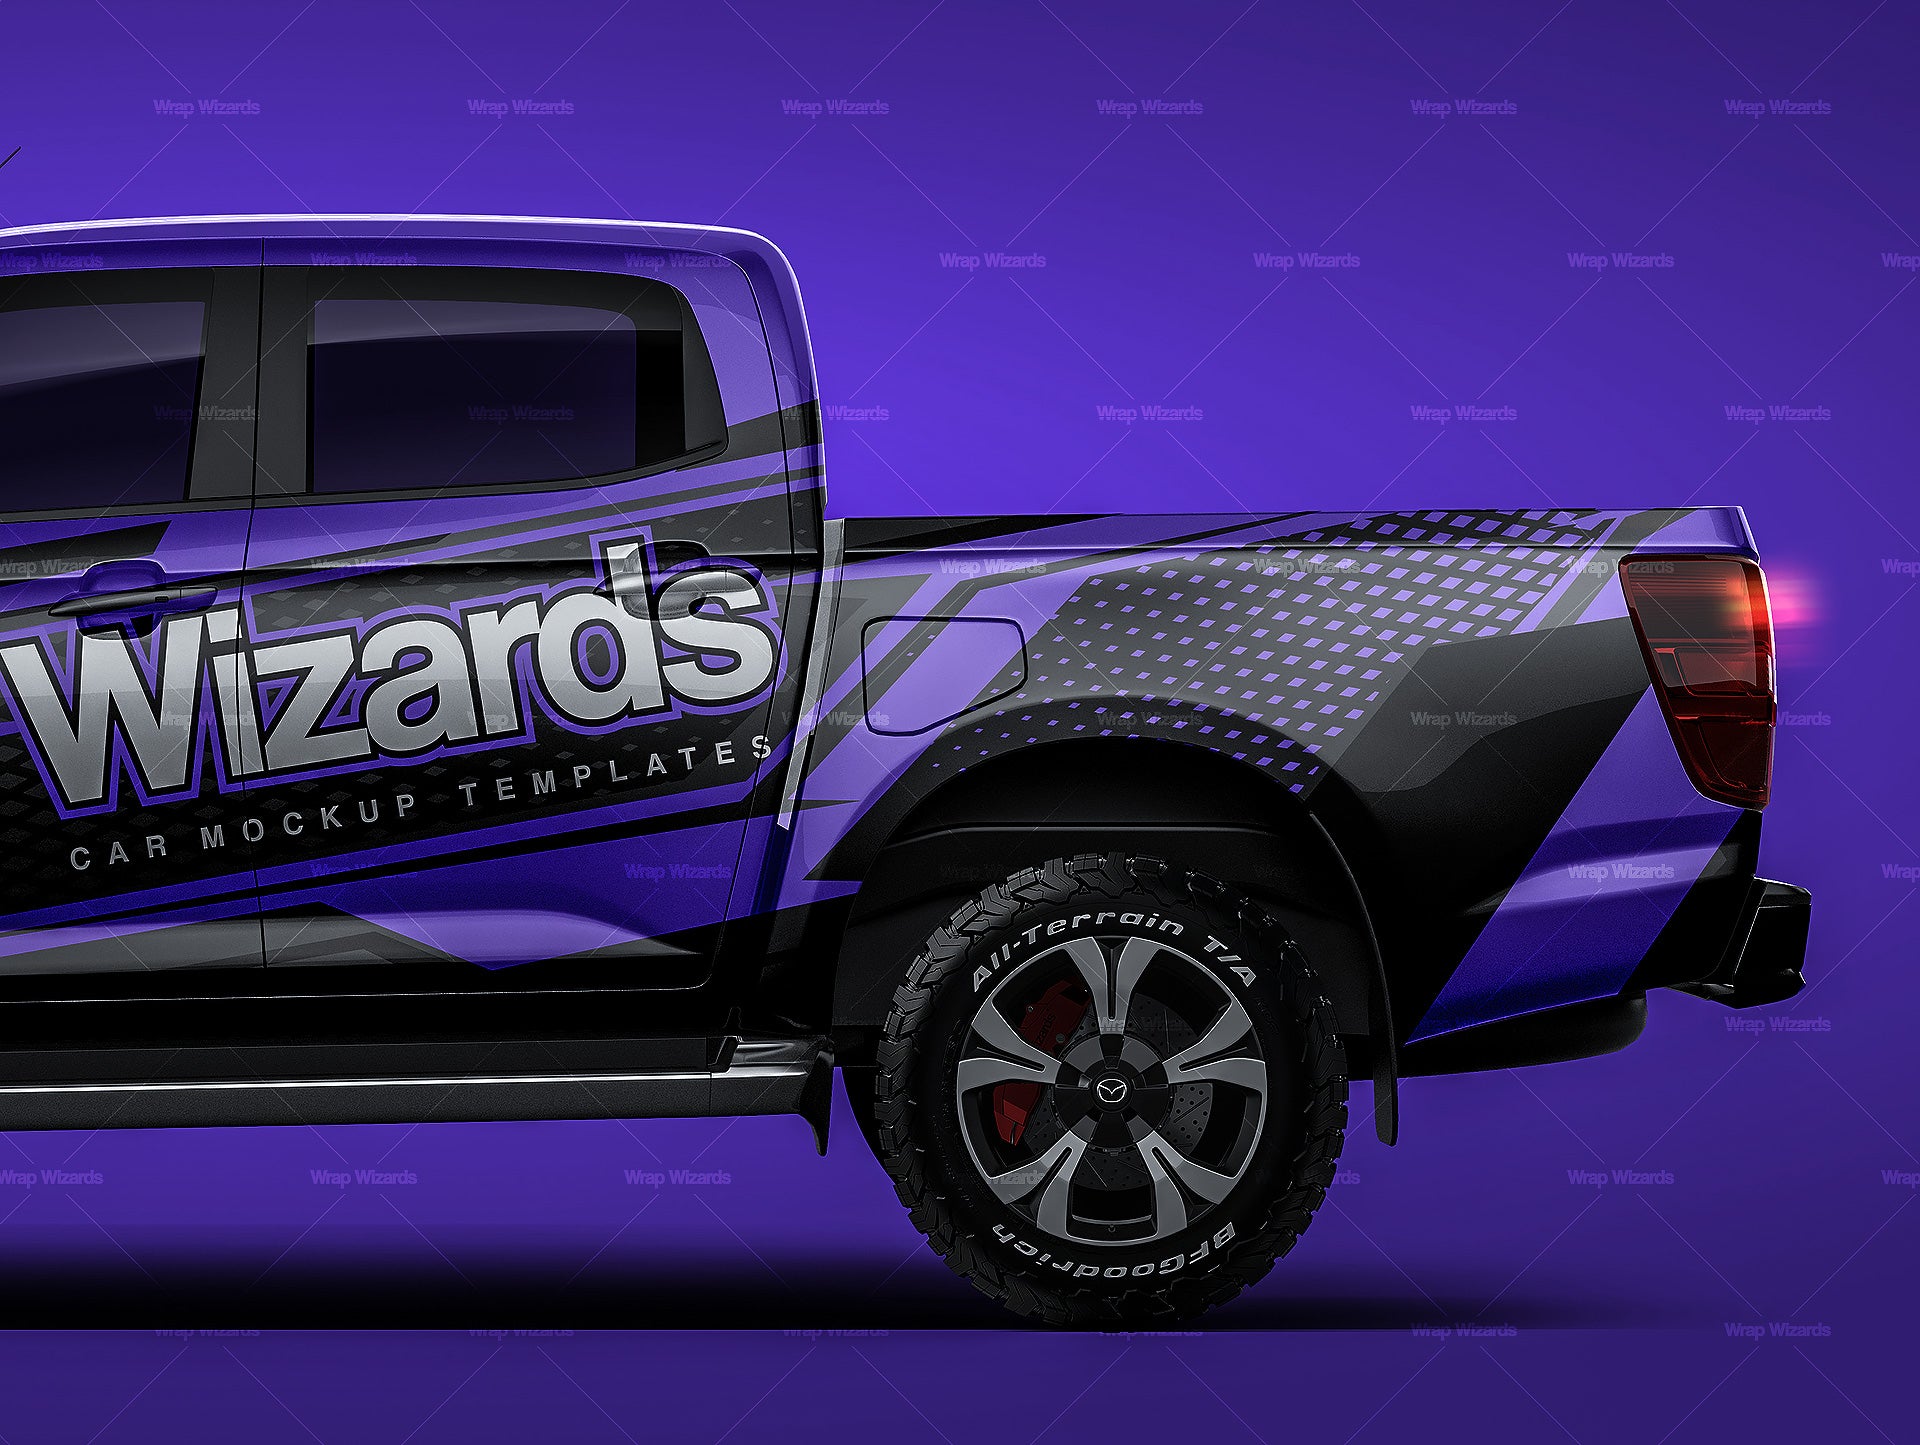 Mazda BT-50 Double cab glossy finish - all sides Car Mockup Template.psd